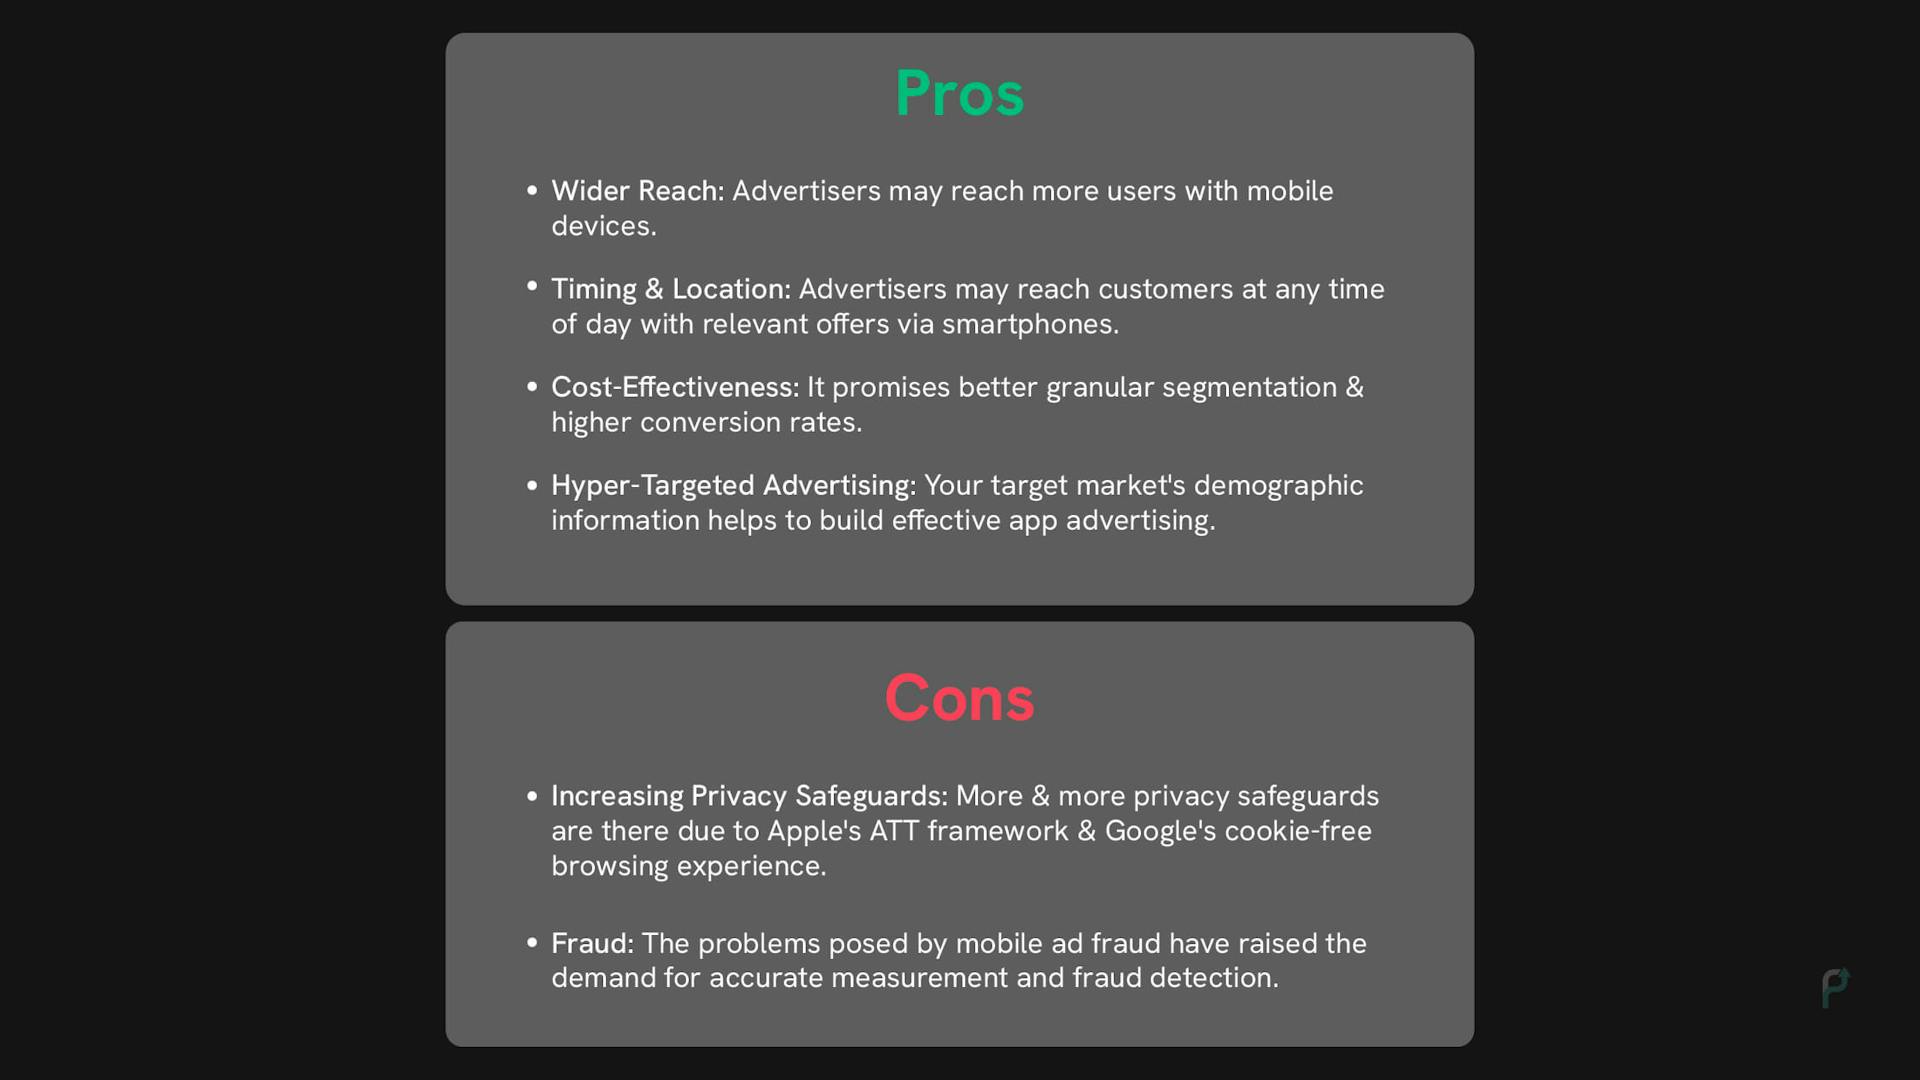 Mobile App Advertising Pros and Cons